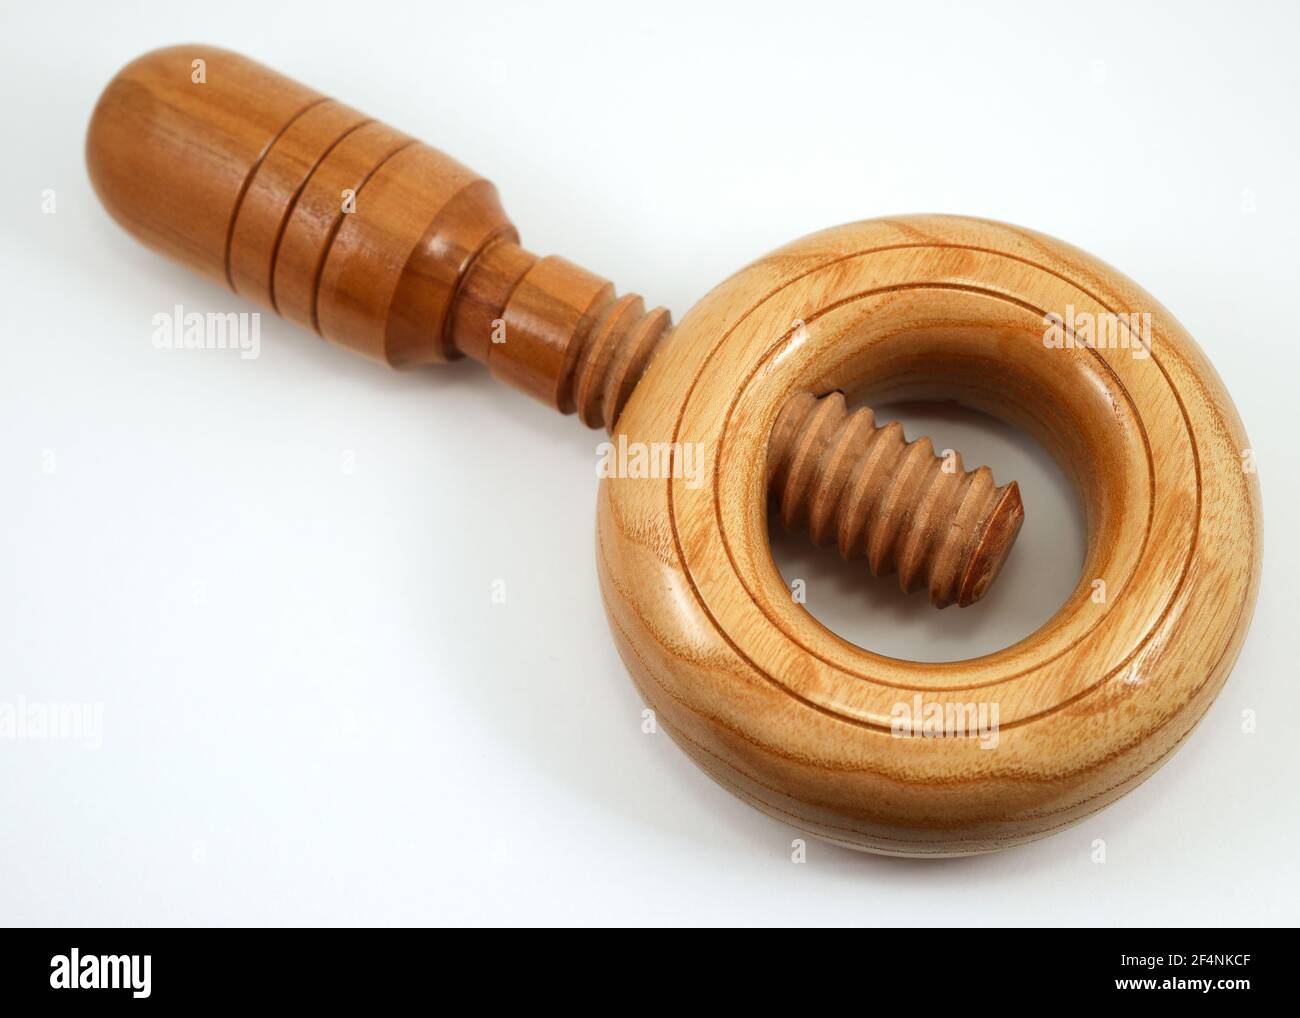 traditional handheld wooden nutcracker on a white background Stock Photo